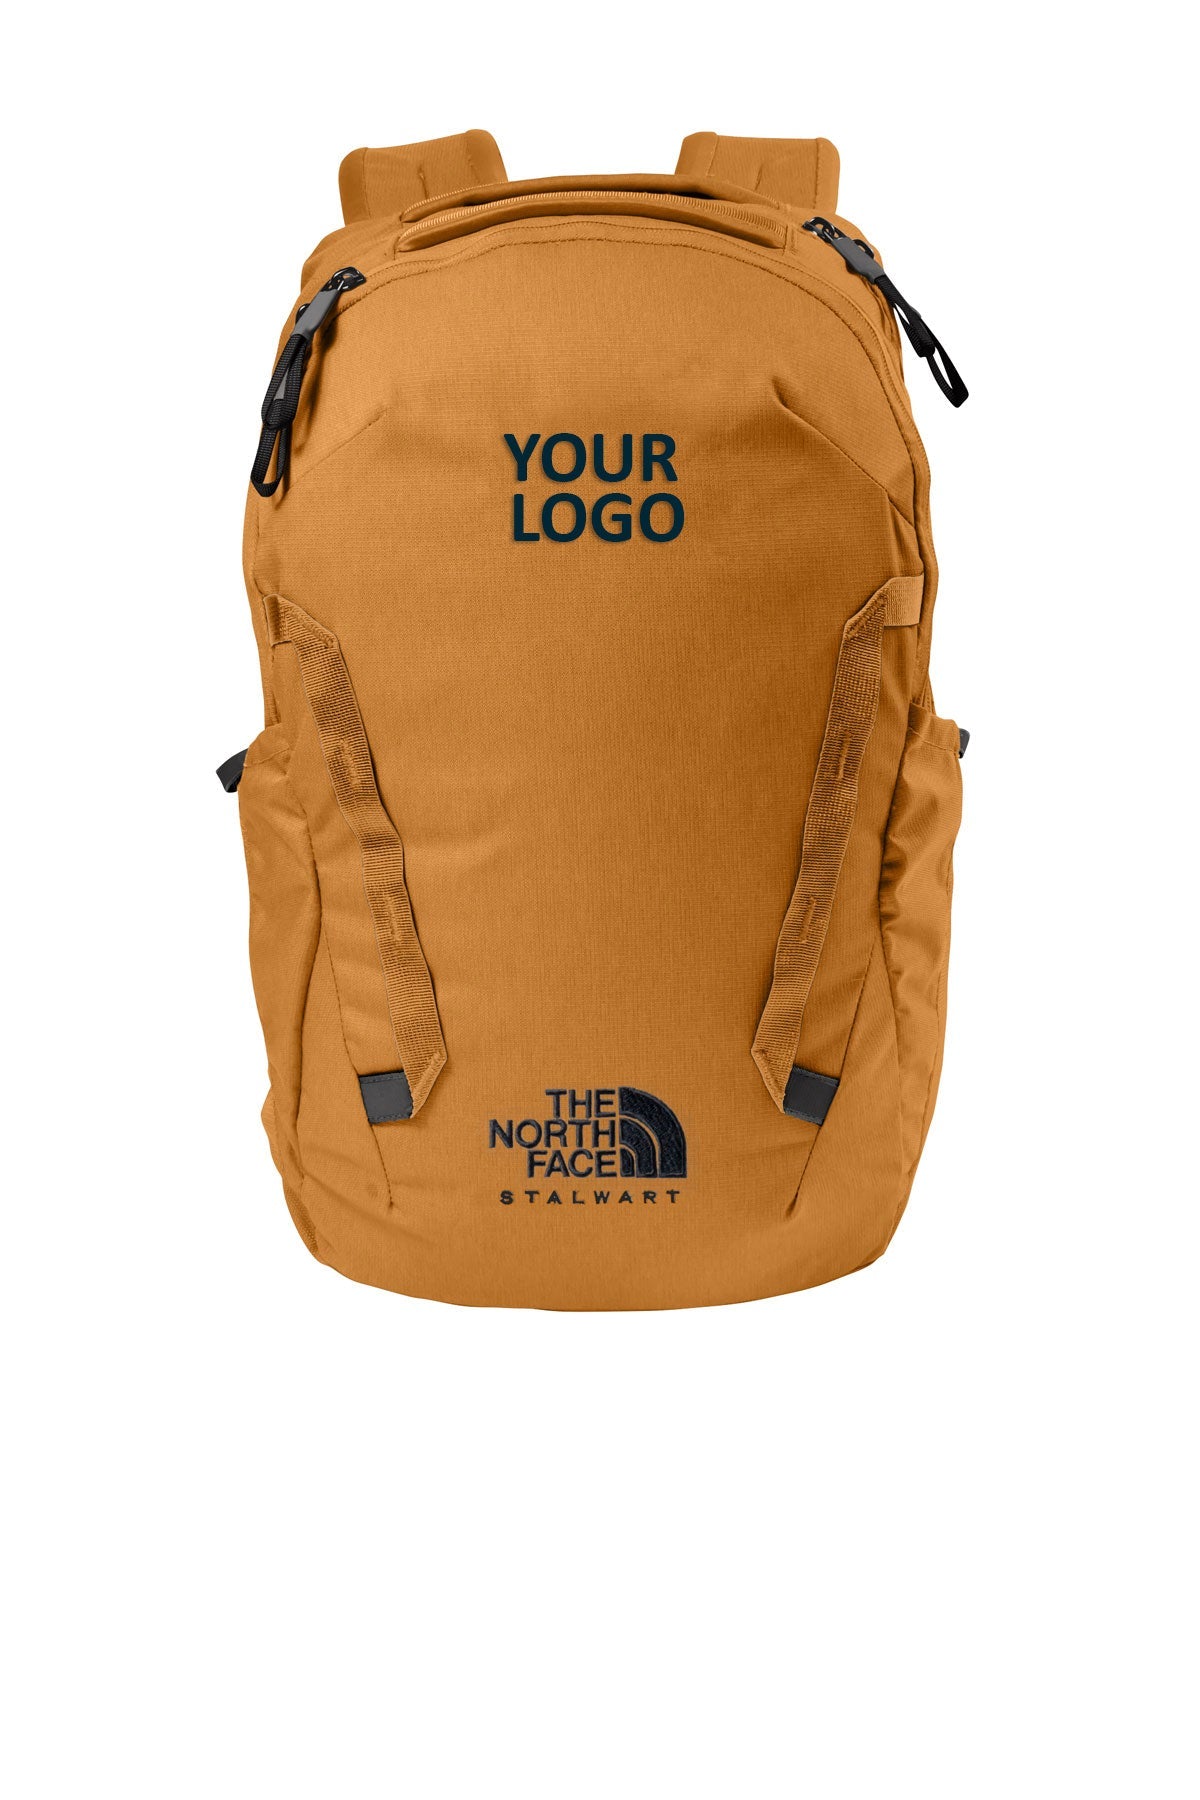 The North Face Timber Tan NF0A52S6 The-North-Face-Stalwart-Backpack-NF0A52S6-Timber-Tan